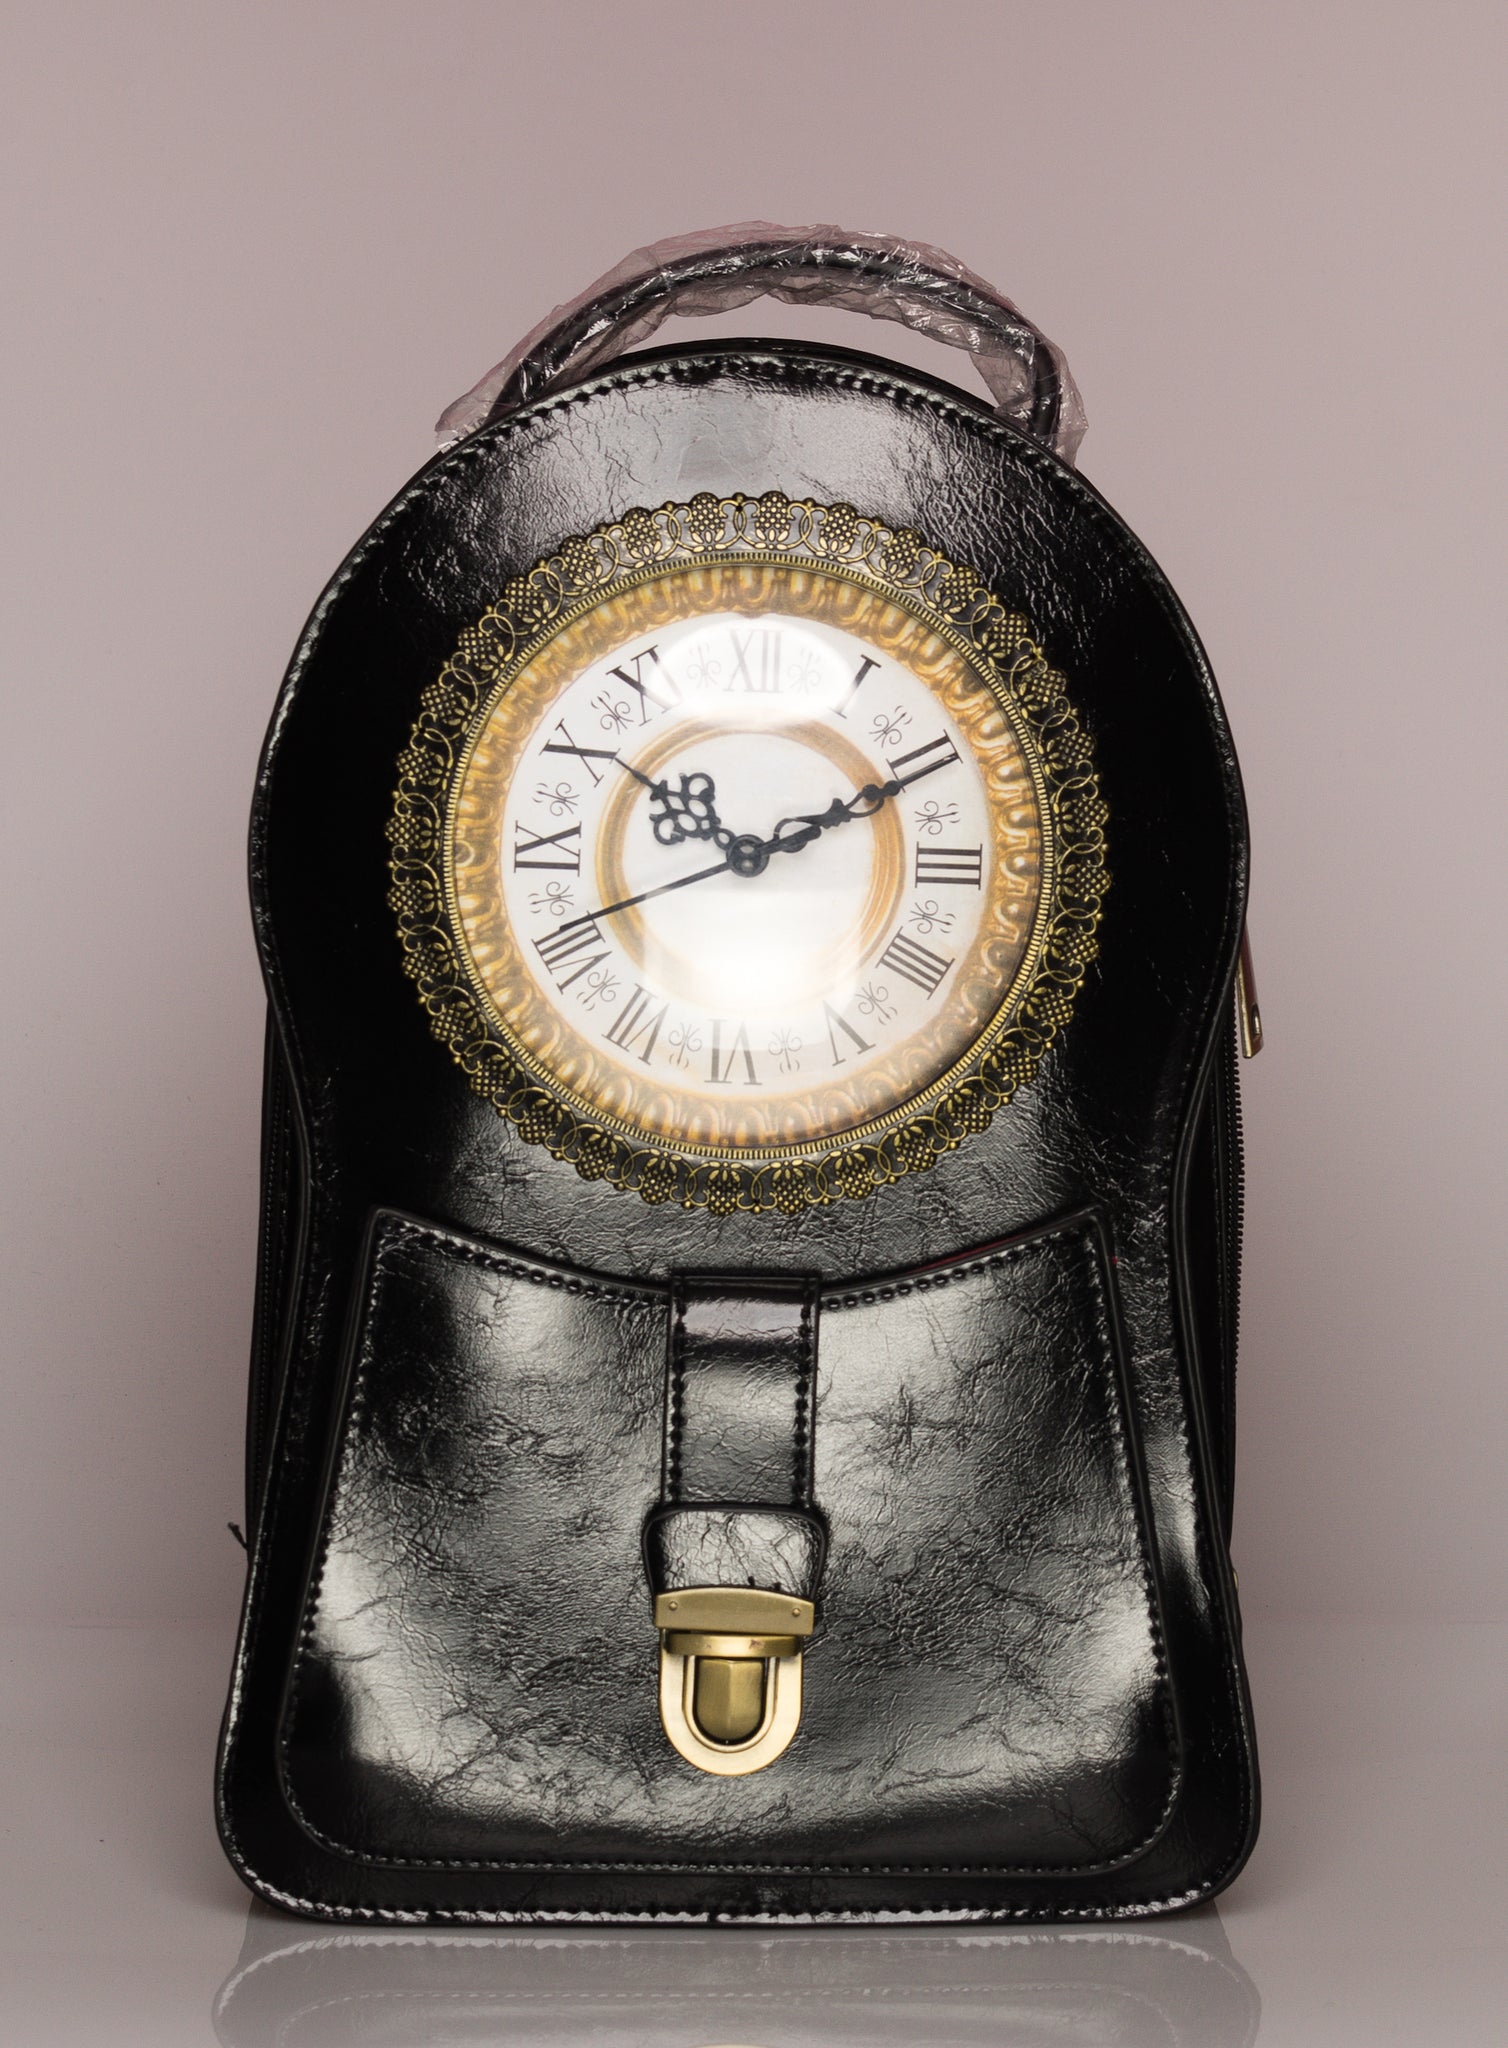 Buy Bag of Small Things Clock Vintage/Retro Yellow Telephone Online